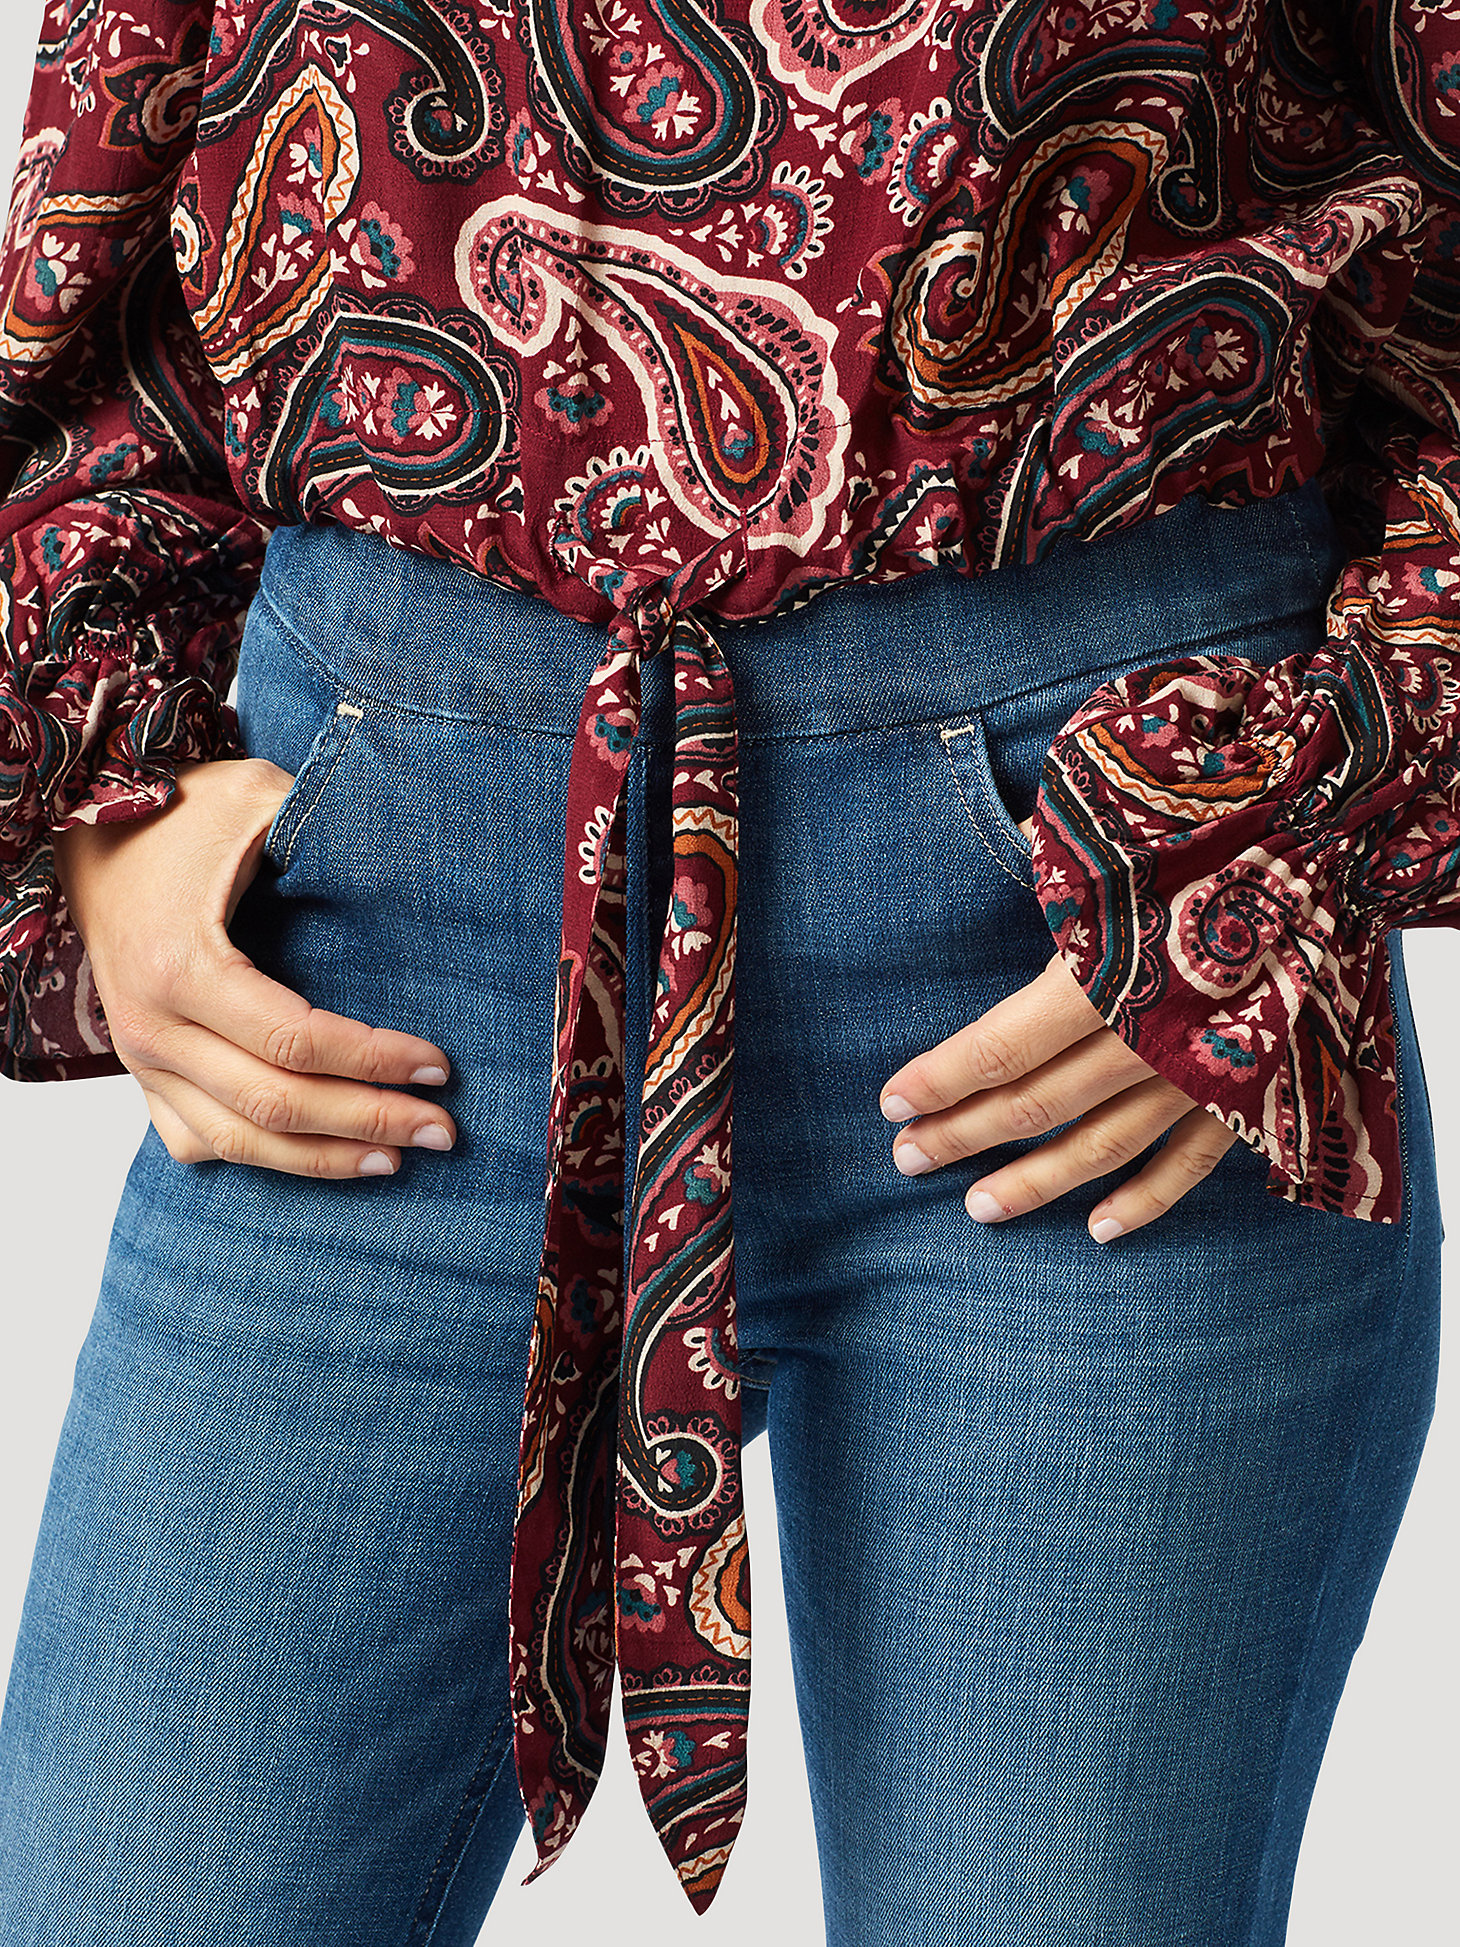 Women's Wrangler Retro® Off The Shoulder Cropped Blouse in Zin Paisley alternative view 6